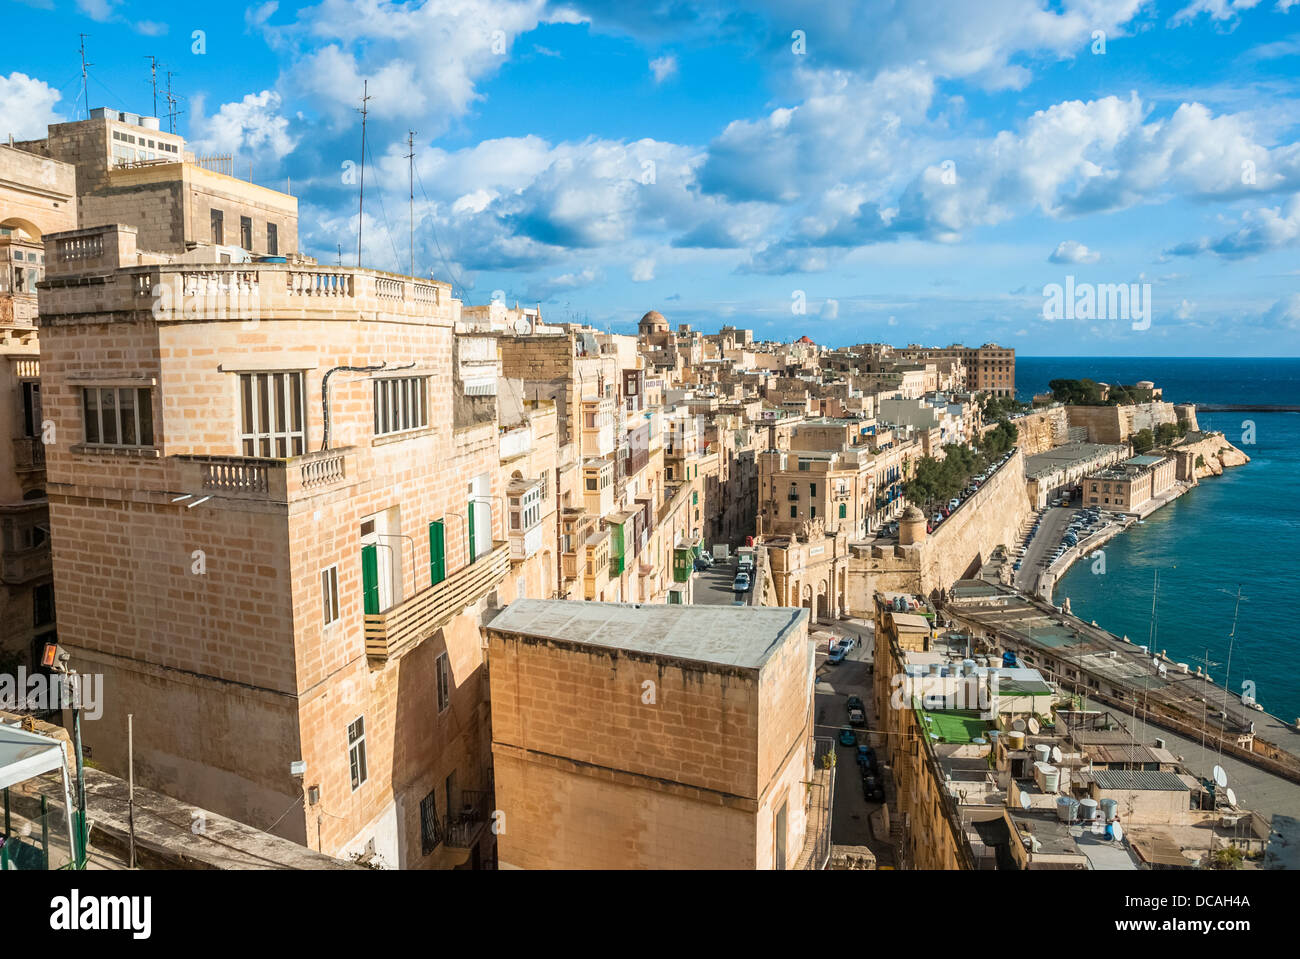 Sandstone buildings overlook the old harbor and Victoria Gate in the city of Valetta, Malta Stock Photo